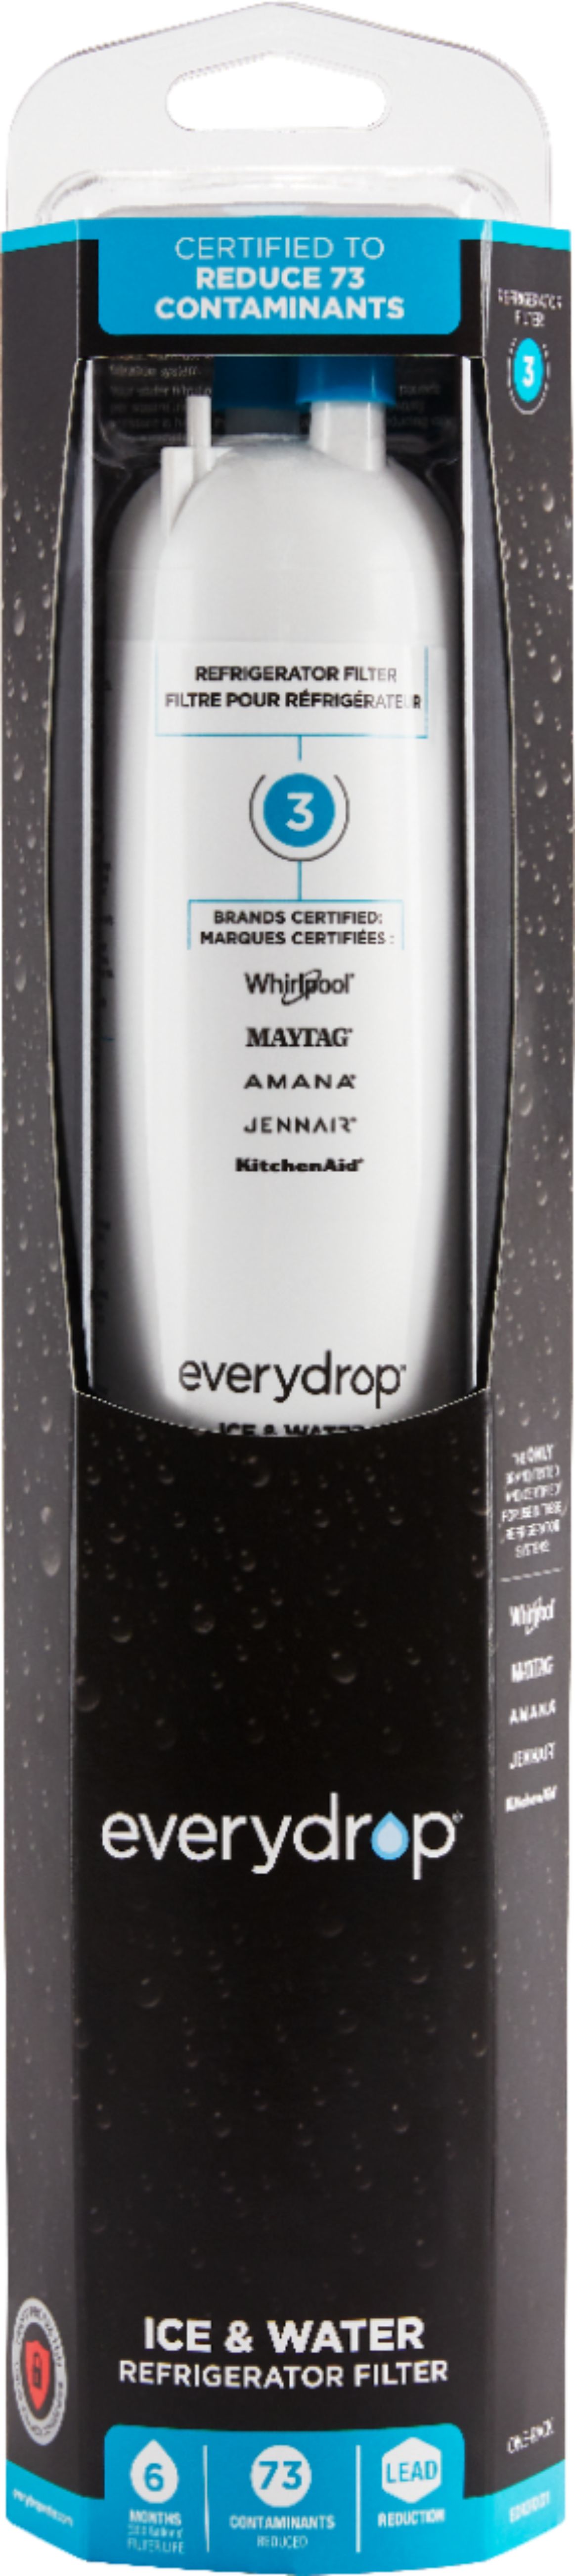 everydrop by Whirlpool Ice and Water Refrigerator Filter 3